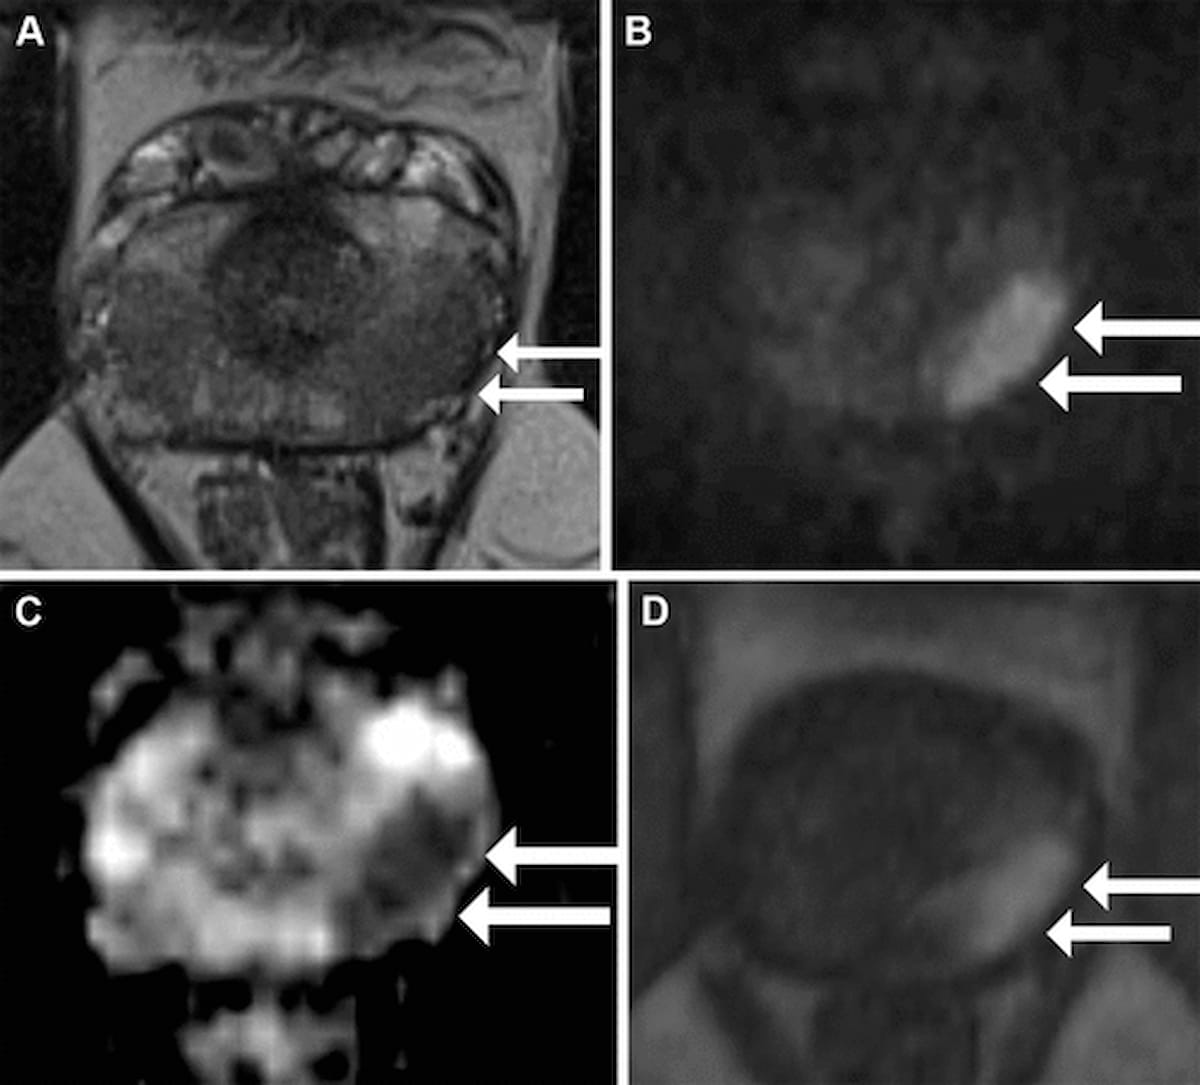 Study: mpMRI-Targeted Biopsies Offer Better Detection of Cribriform and Intraductal PCa than Systematic Biopsies